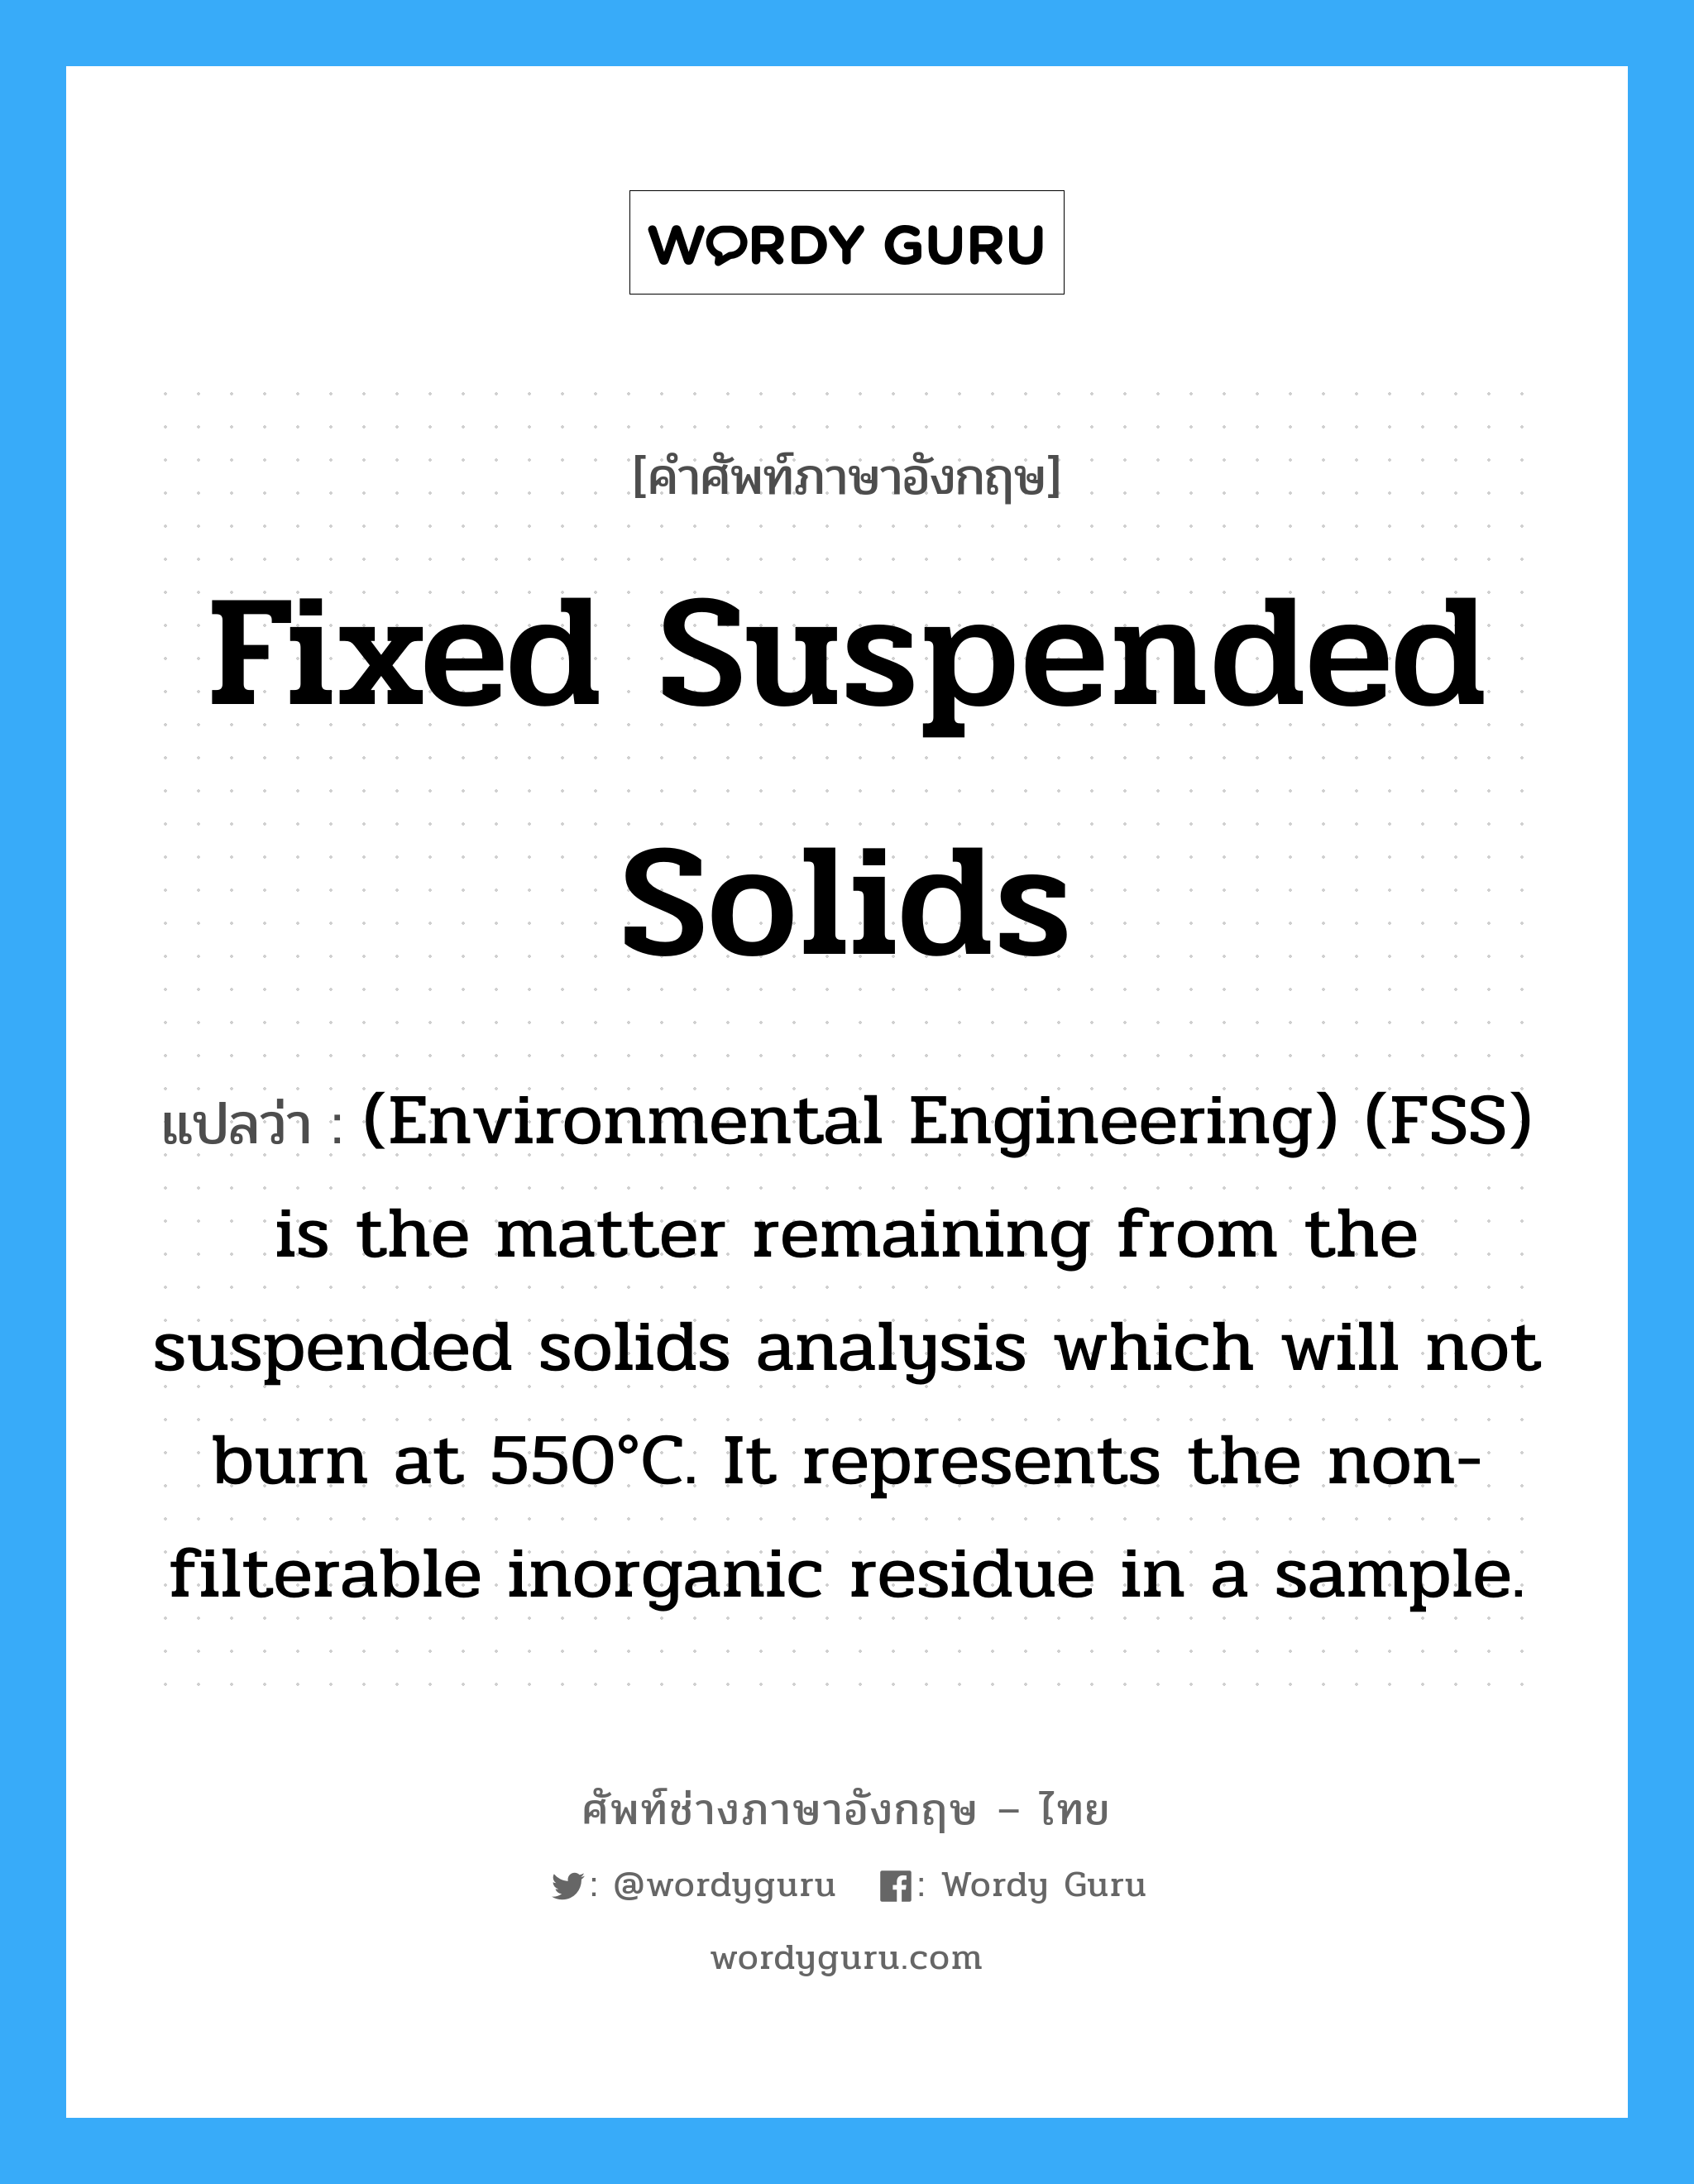 (Environmental Engineering) (FSS) is the matter remaining from the suspended solids analysis which will not burn at 550°C. It represents the non-filterable inorganic residue in a sample. ภาษาอังกฤษ?, คำศัพท์ช่างภาษาอังกฤษ - ไทย (Environmental Engineering) (FSS) is the matter remaining from the suspended solids analysis which will not burn at 550°C. It represents the non-filterable inorganic residue in a sample. คำศัพท์ภาษาอังกฤษ (Environmental Engineering) (FSS) is the matter remaining from the suspended solids analysis which will not burn at 550°C. It represents the non-filterable inorganic residue in a sample. แปลว่า Fixed suspended solids